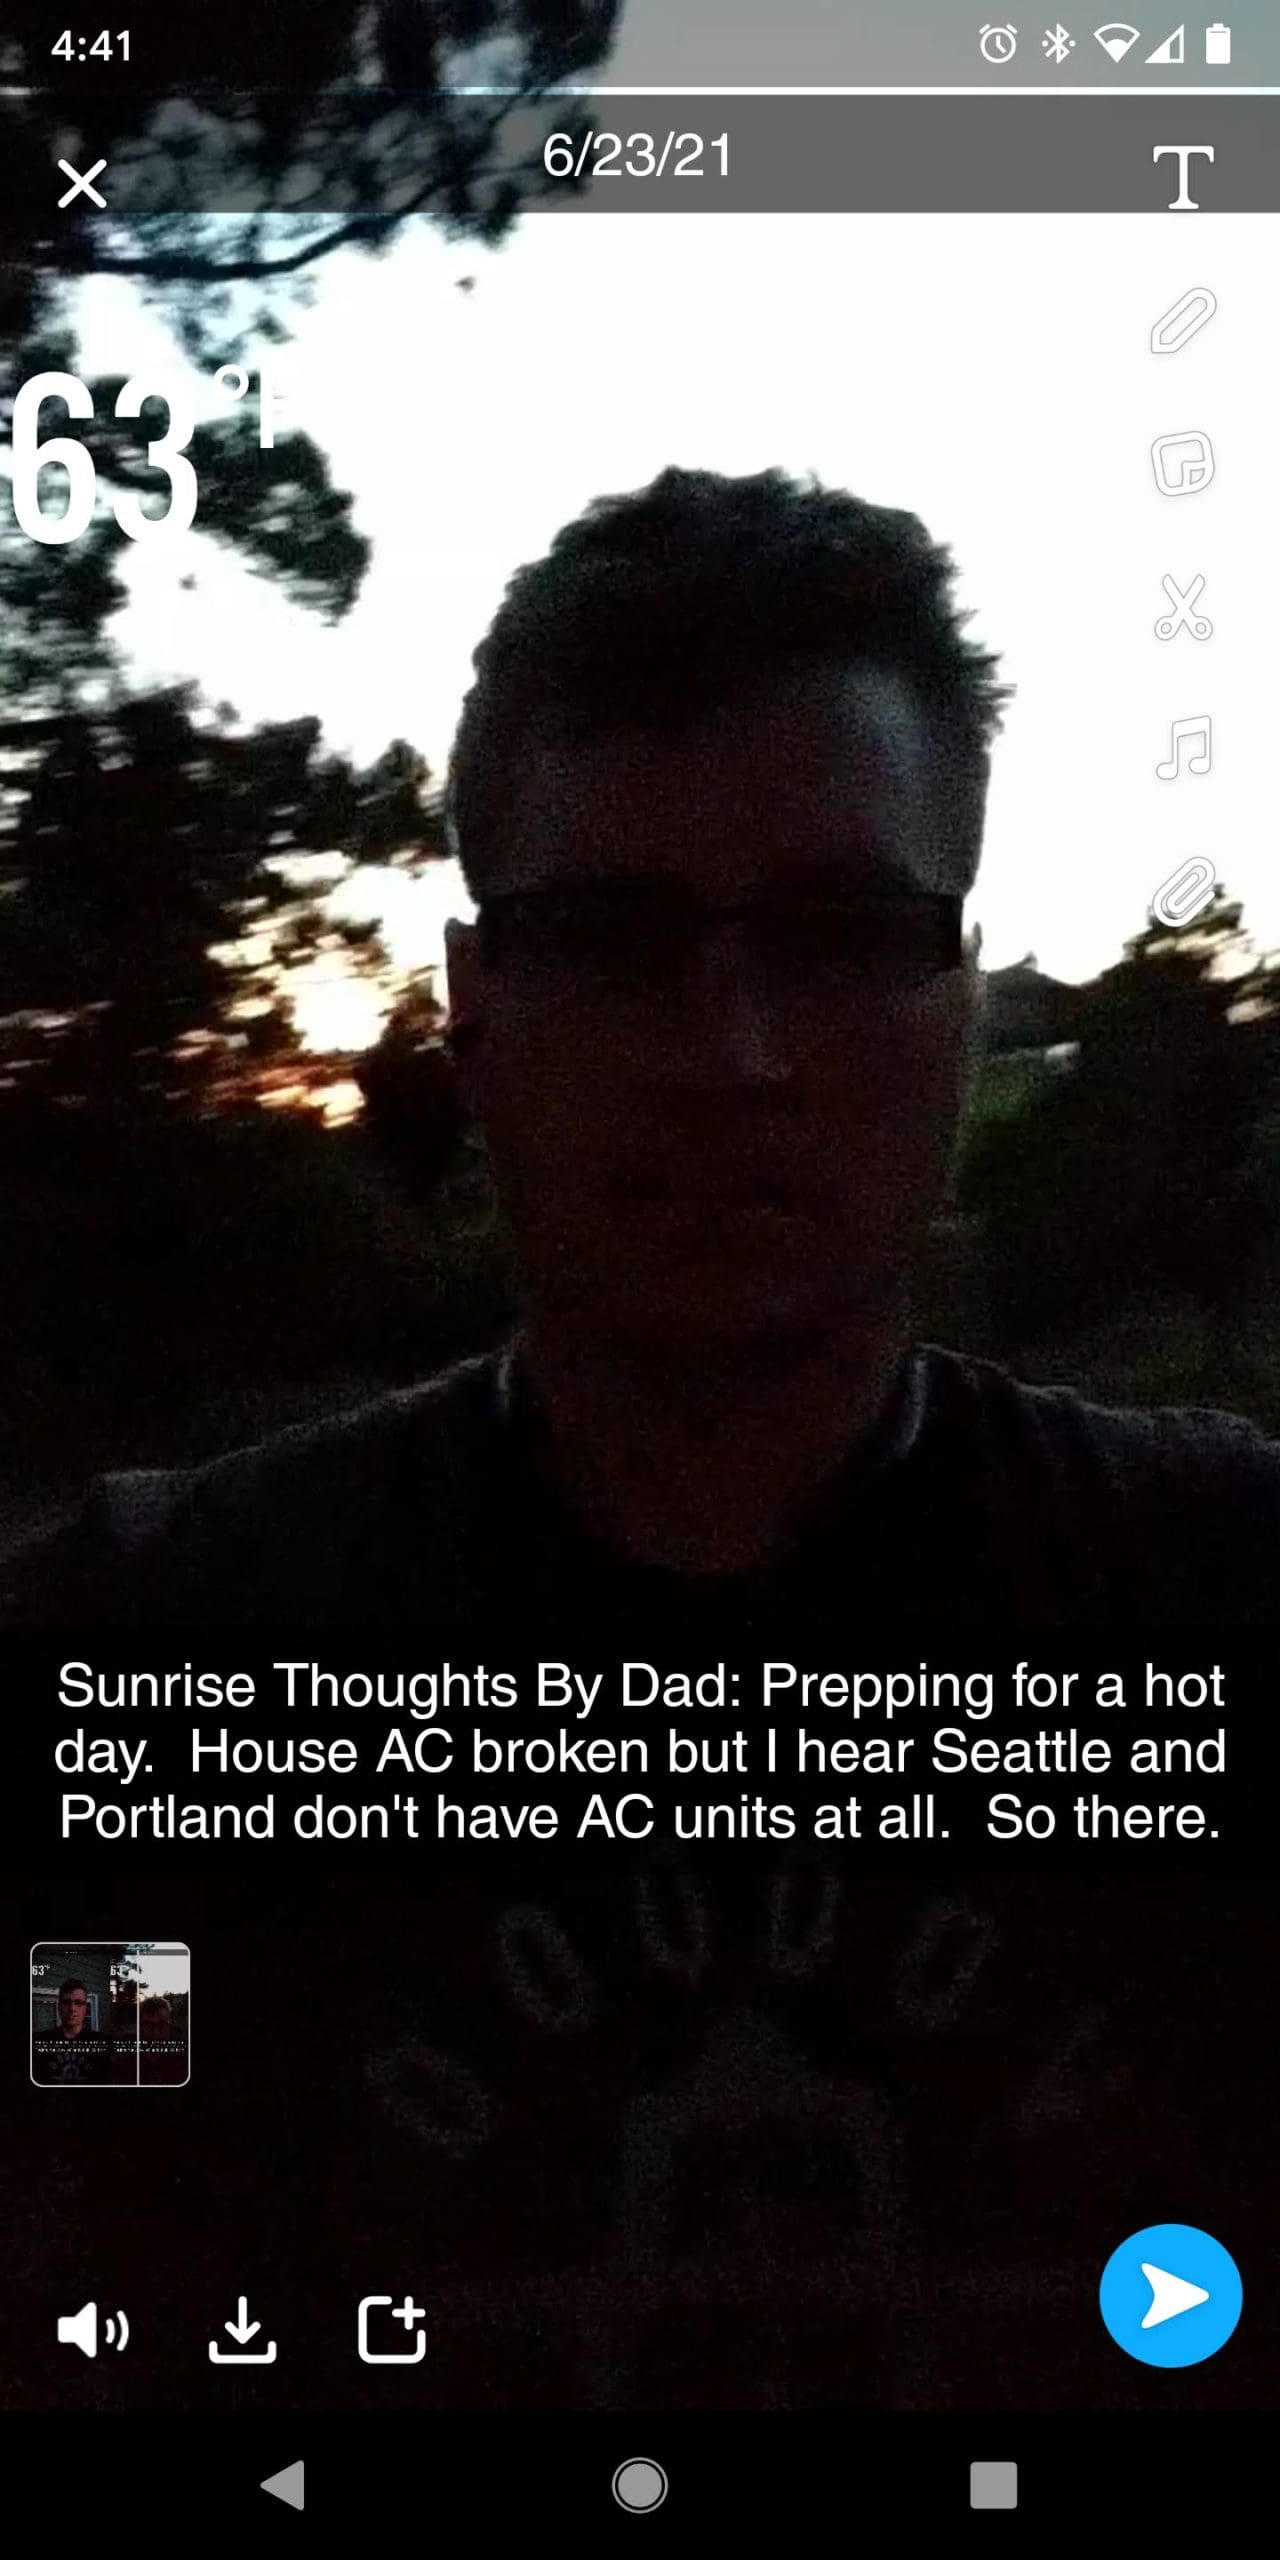 Sunrise Thoughts By Dad: Prepping for a hot day. House AC broken but I hear Seattle and Portland don't have AC units at all. So there.